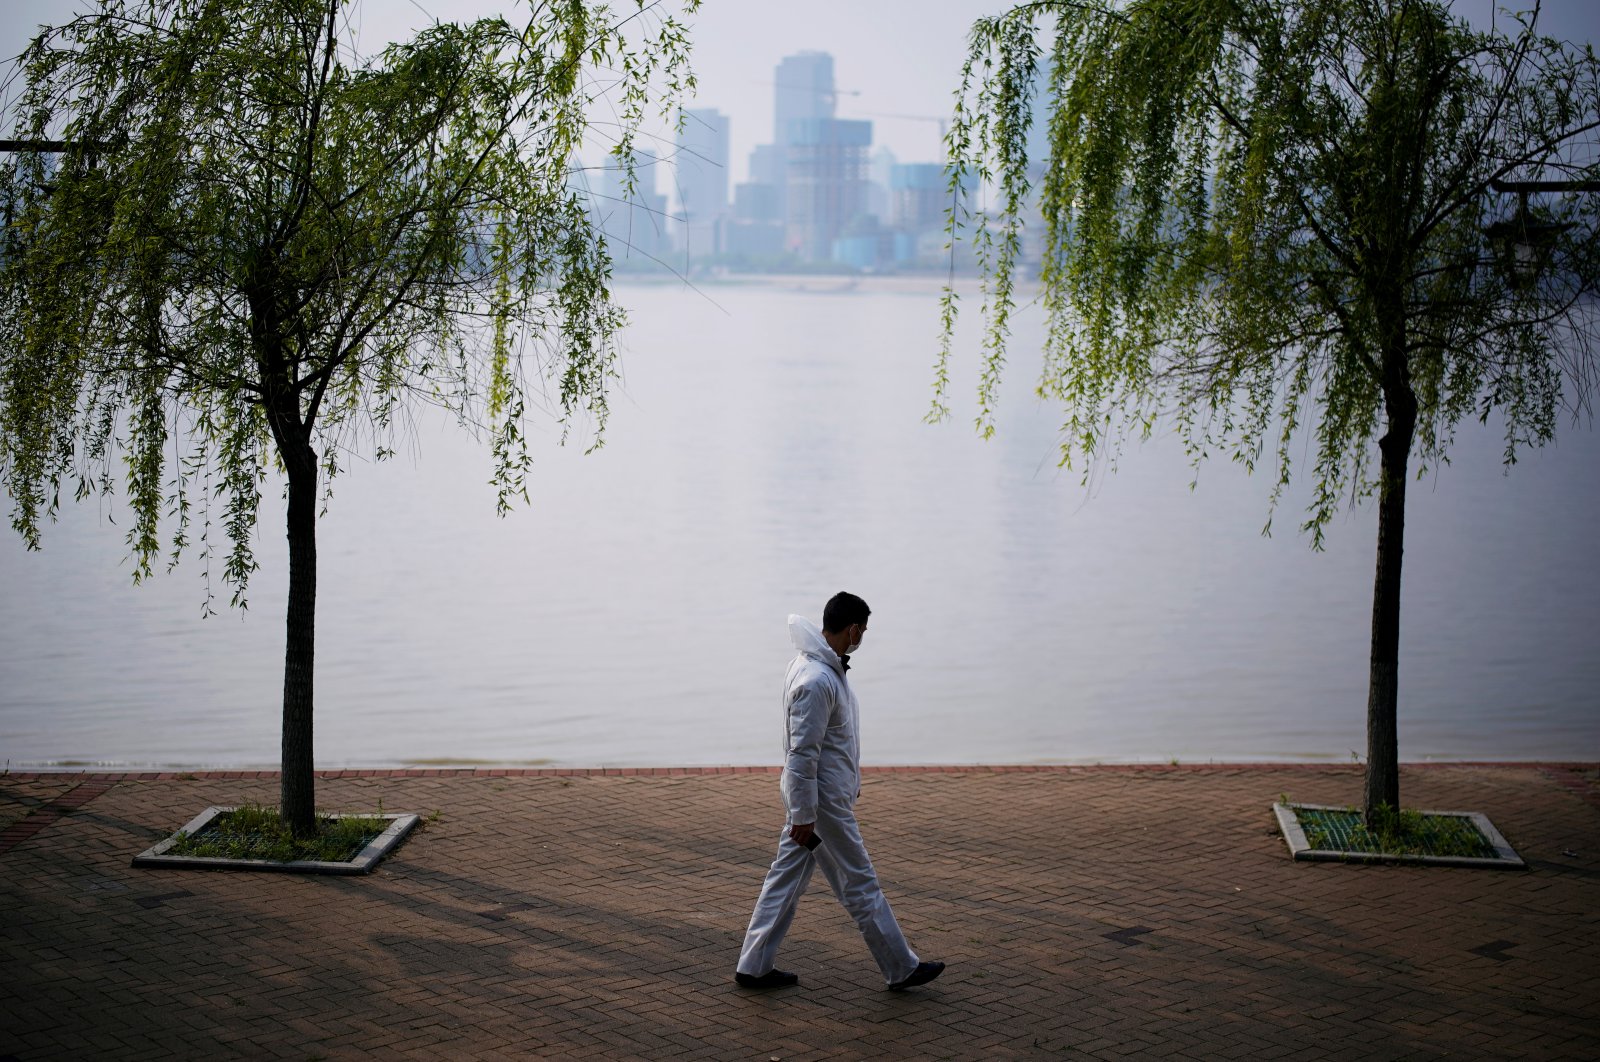 A man wearing protective gear walks by the Yangtze river in Wuhan, Hubei province, China, April 4, 2020. (Reuters Photo)